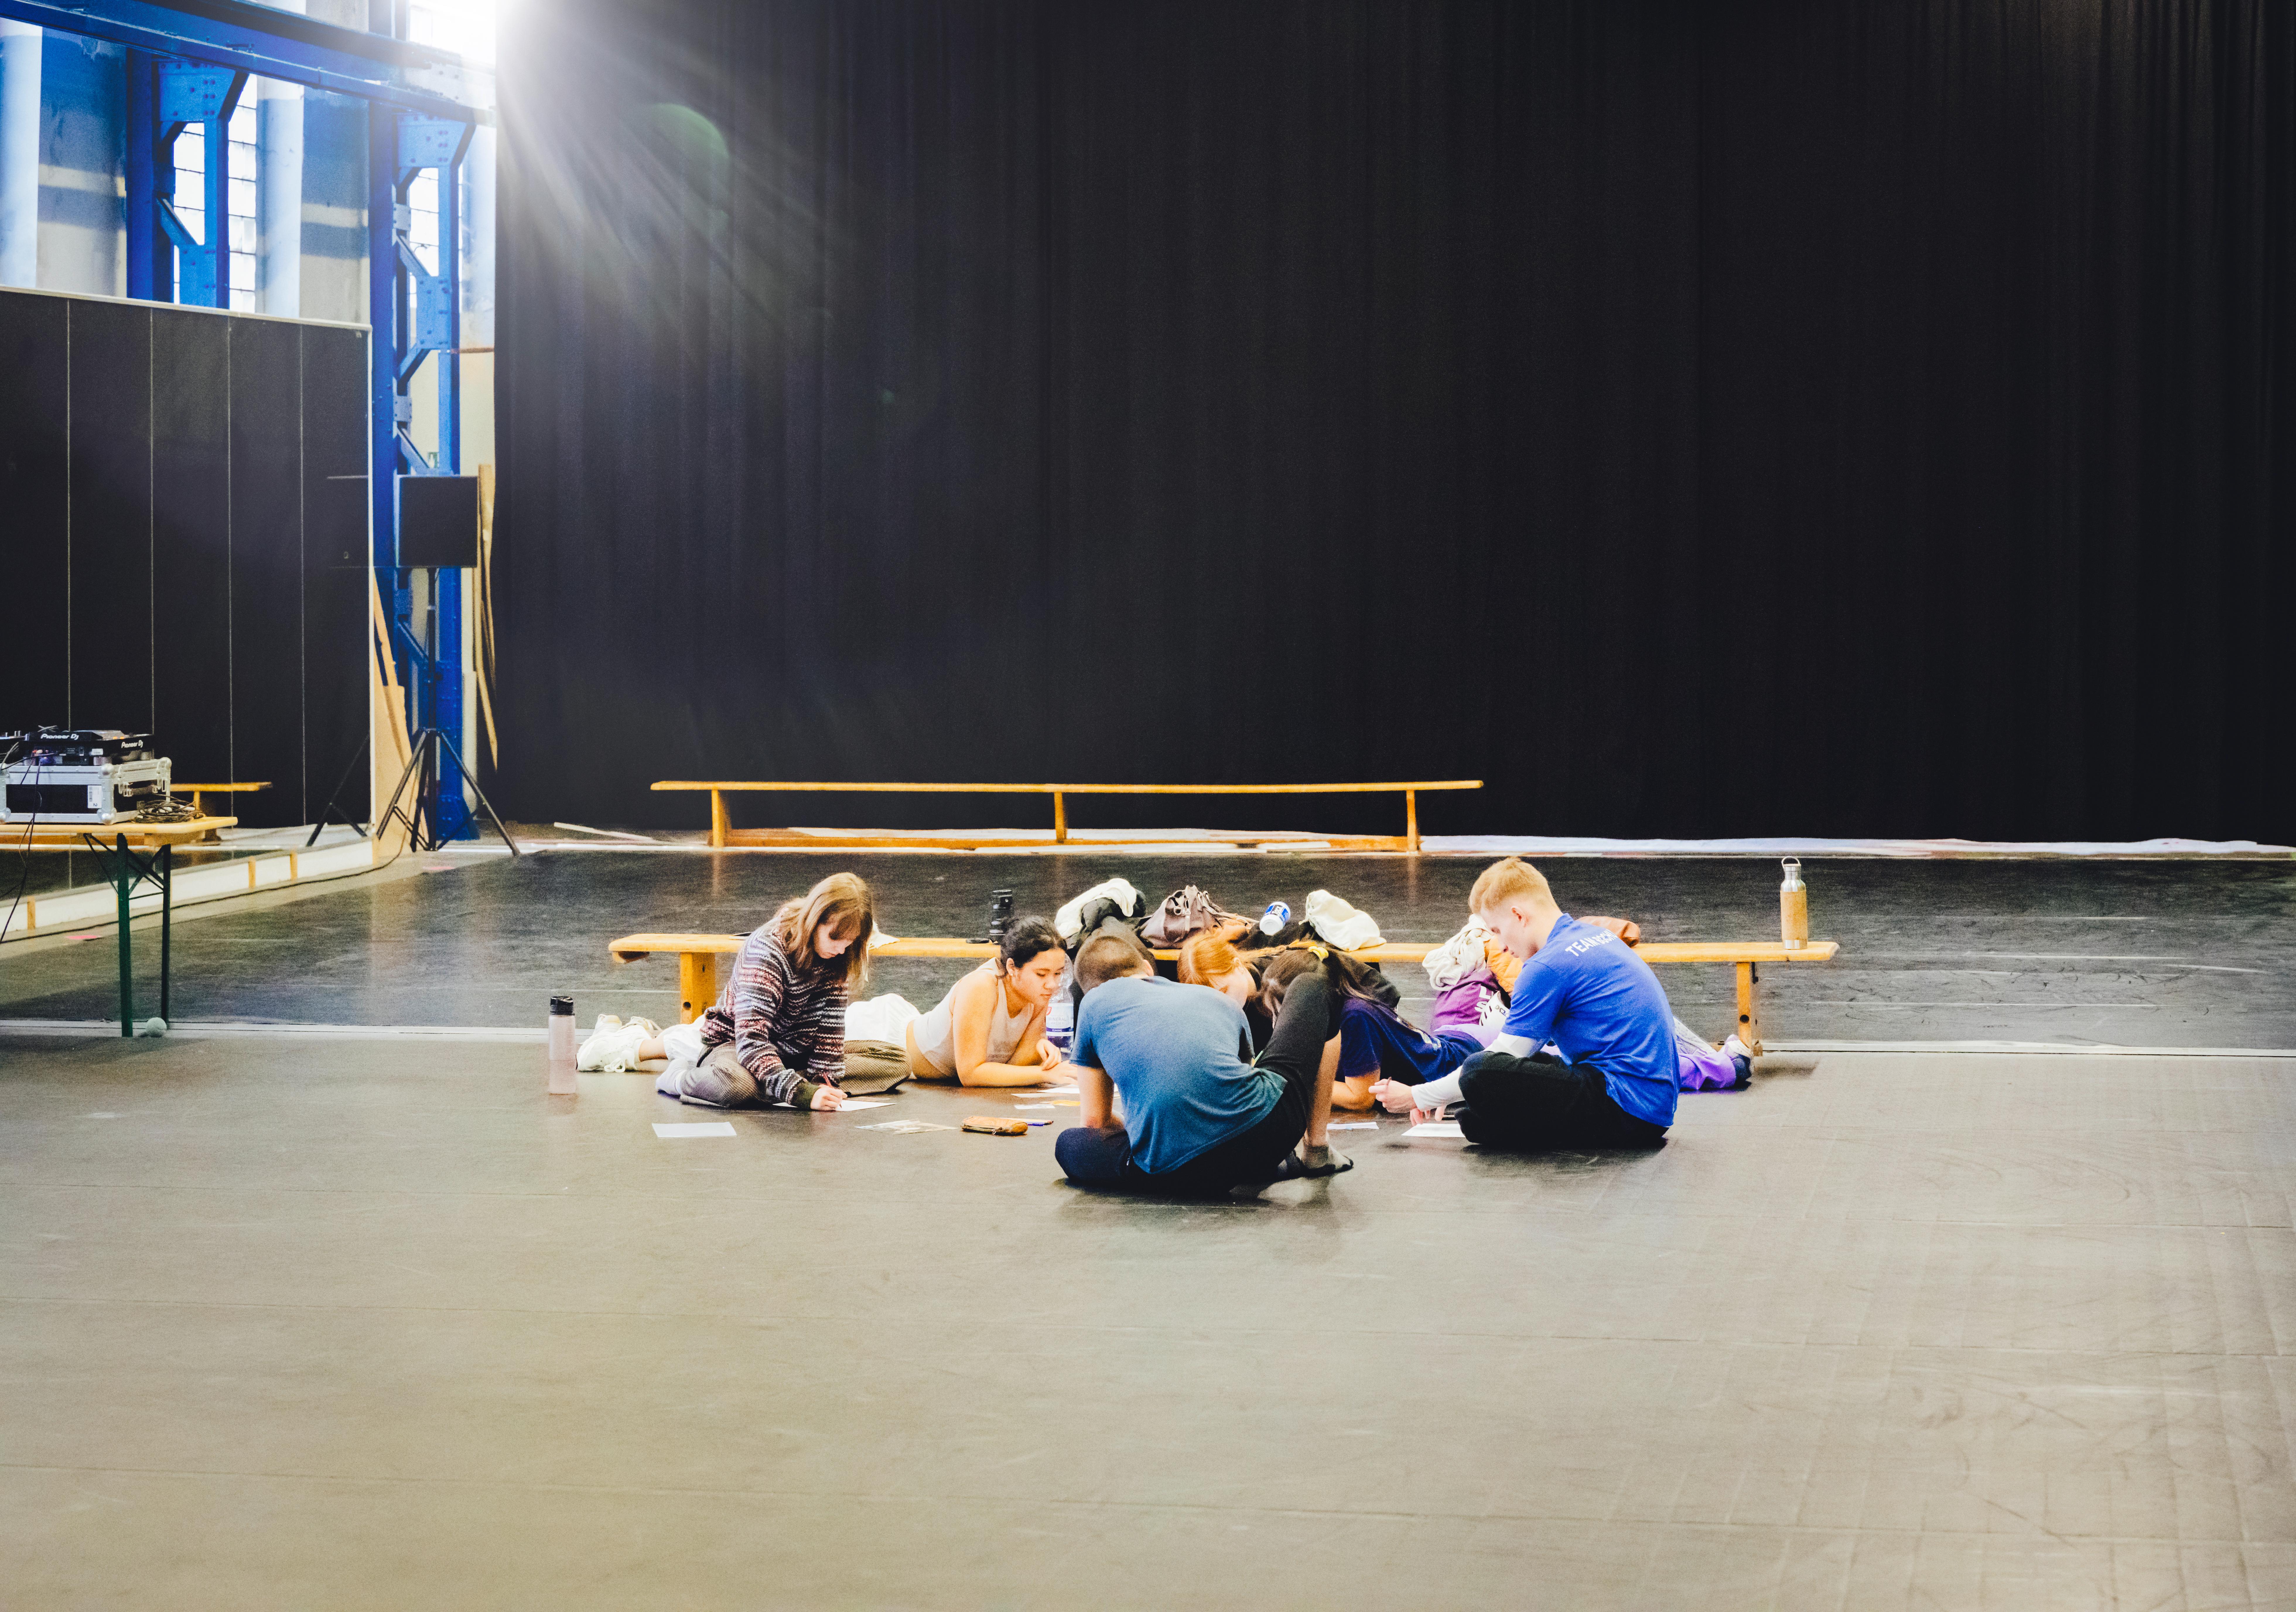 You can see a group of young people sitting together on the floor in a dance hall. It looks as if they are writing something.